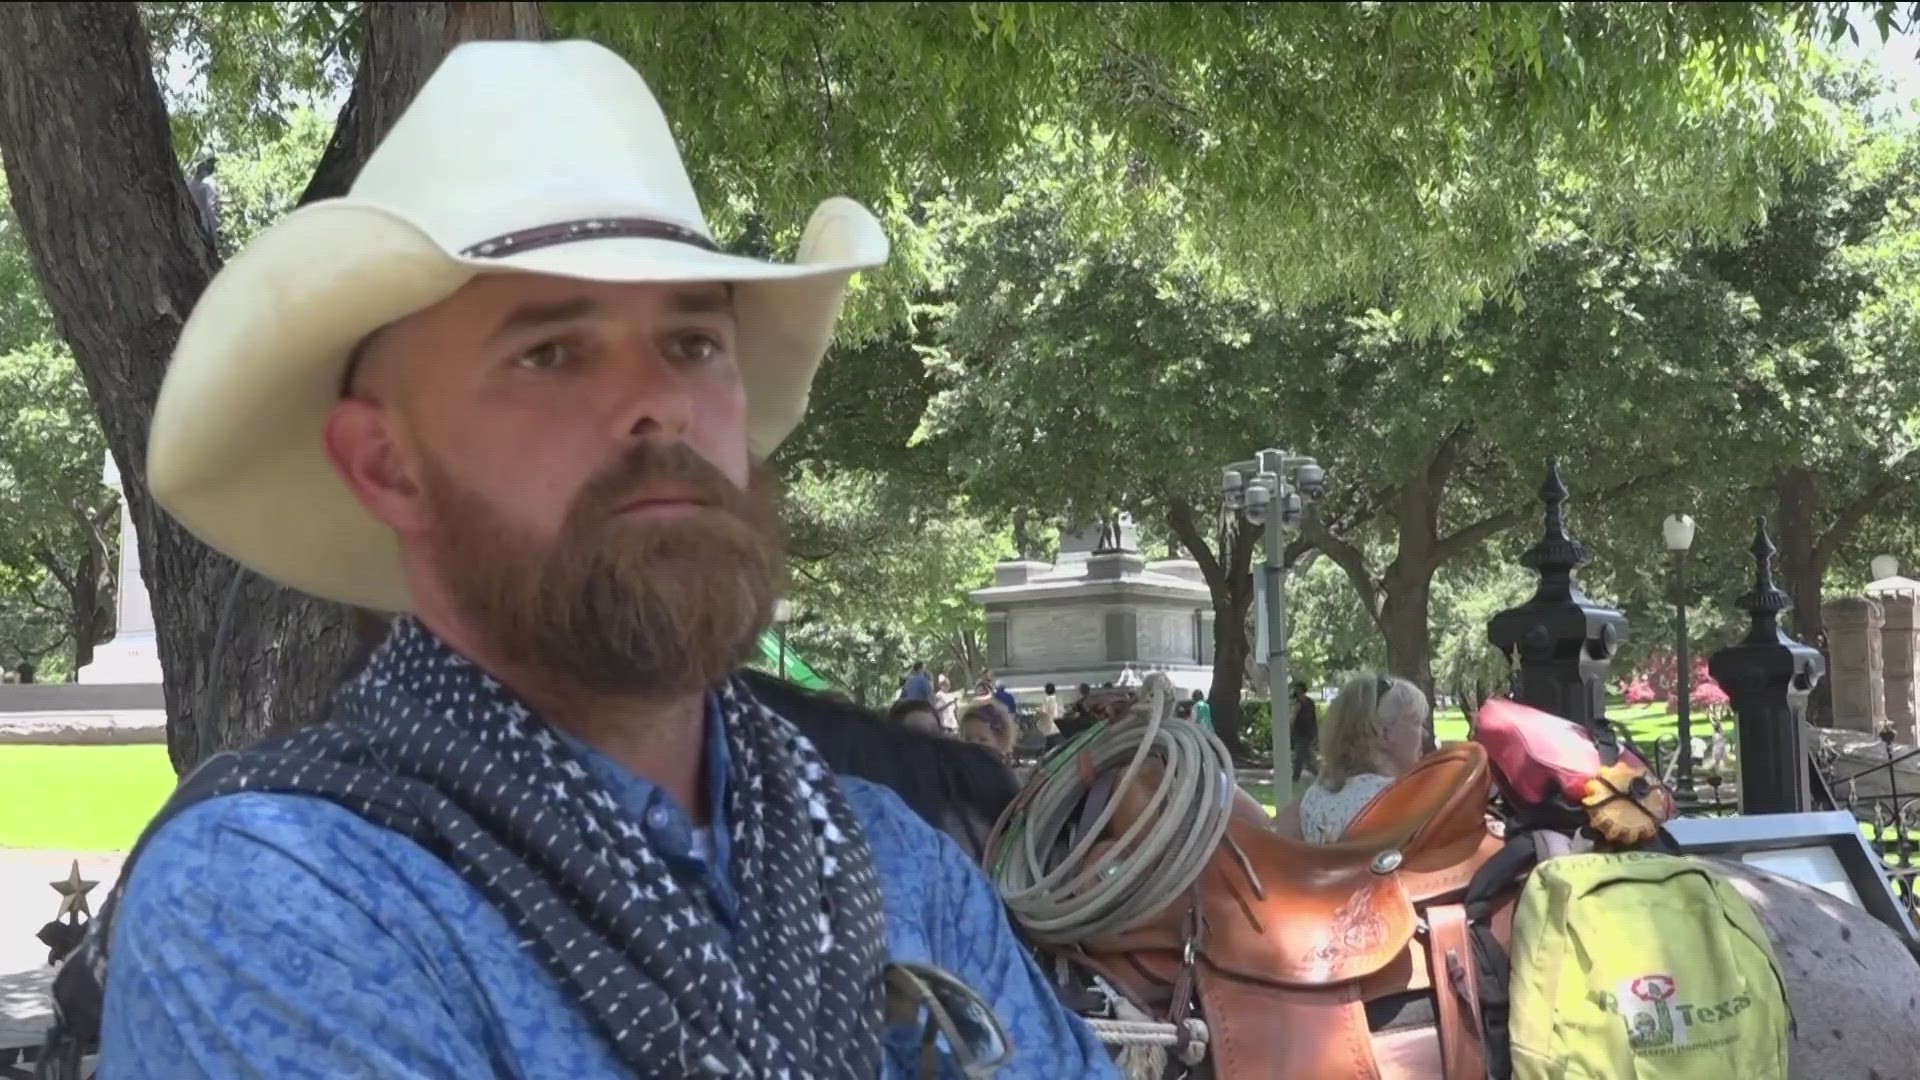 An Army veteran reached an impressive milestone on Saturday, traveling more than 1,000 miles on horseback in an effort to help homeless veterans.